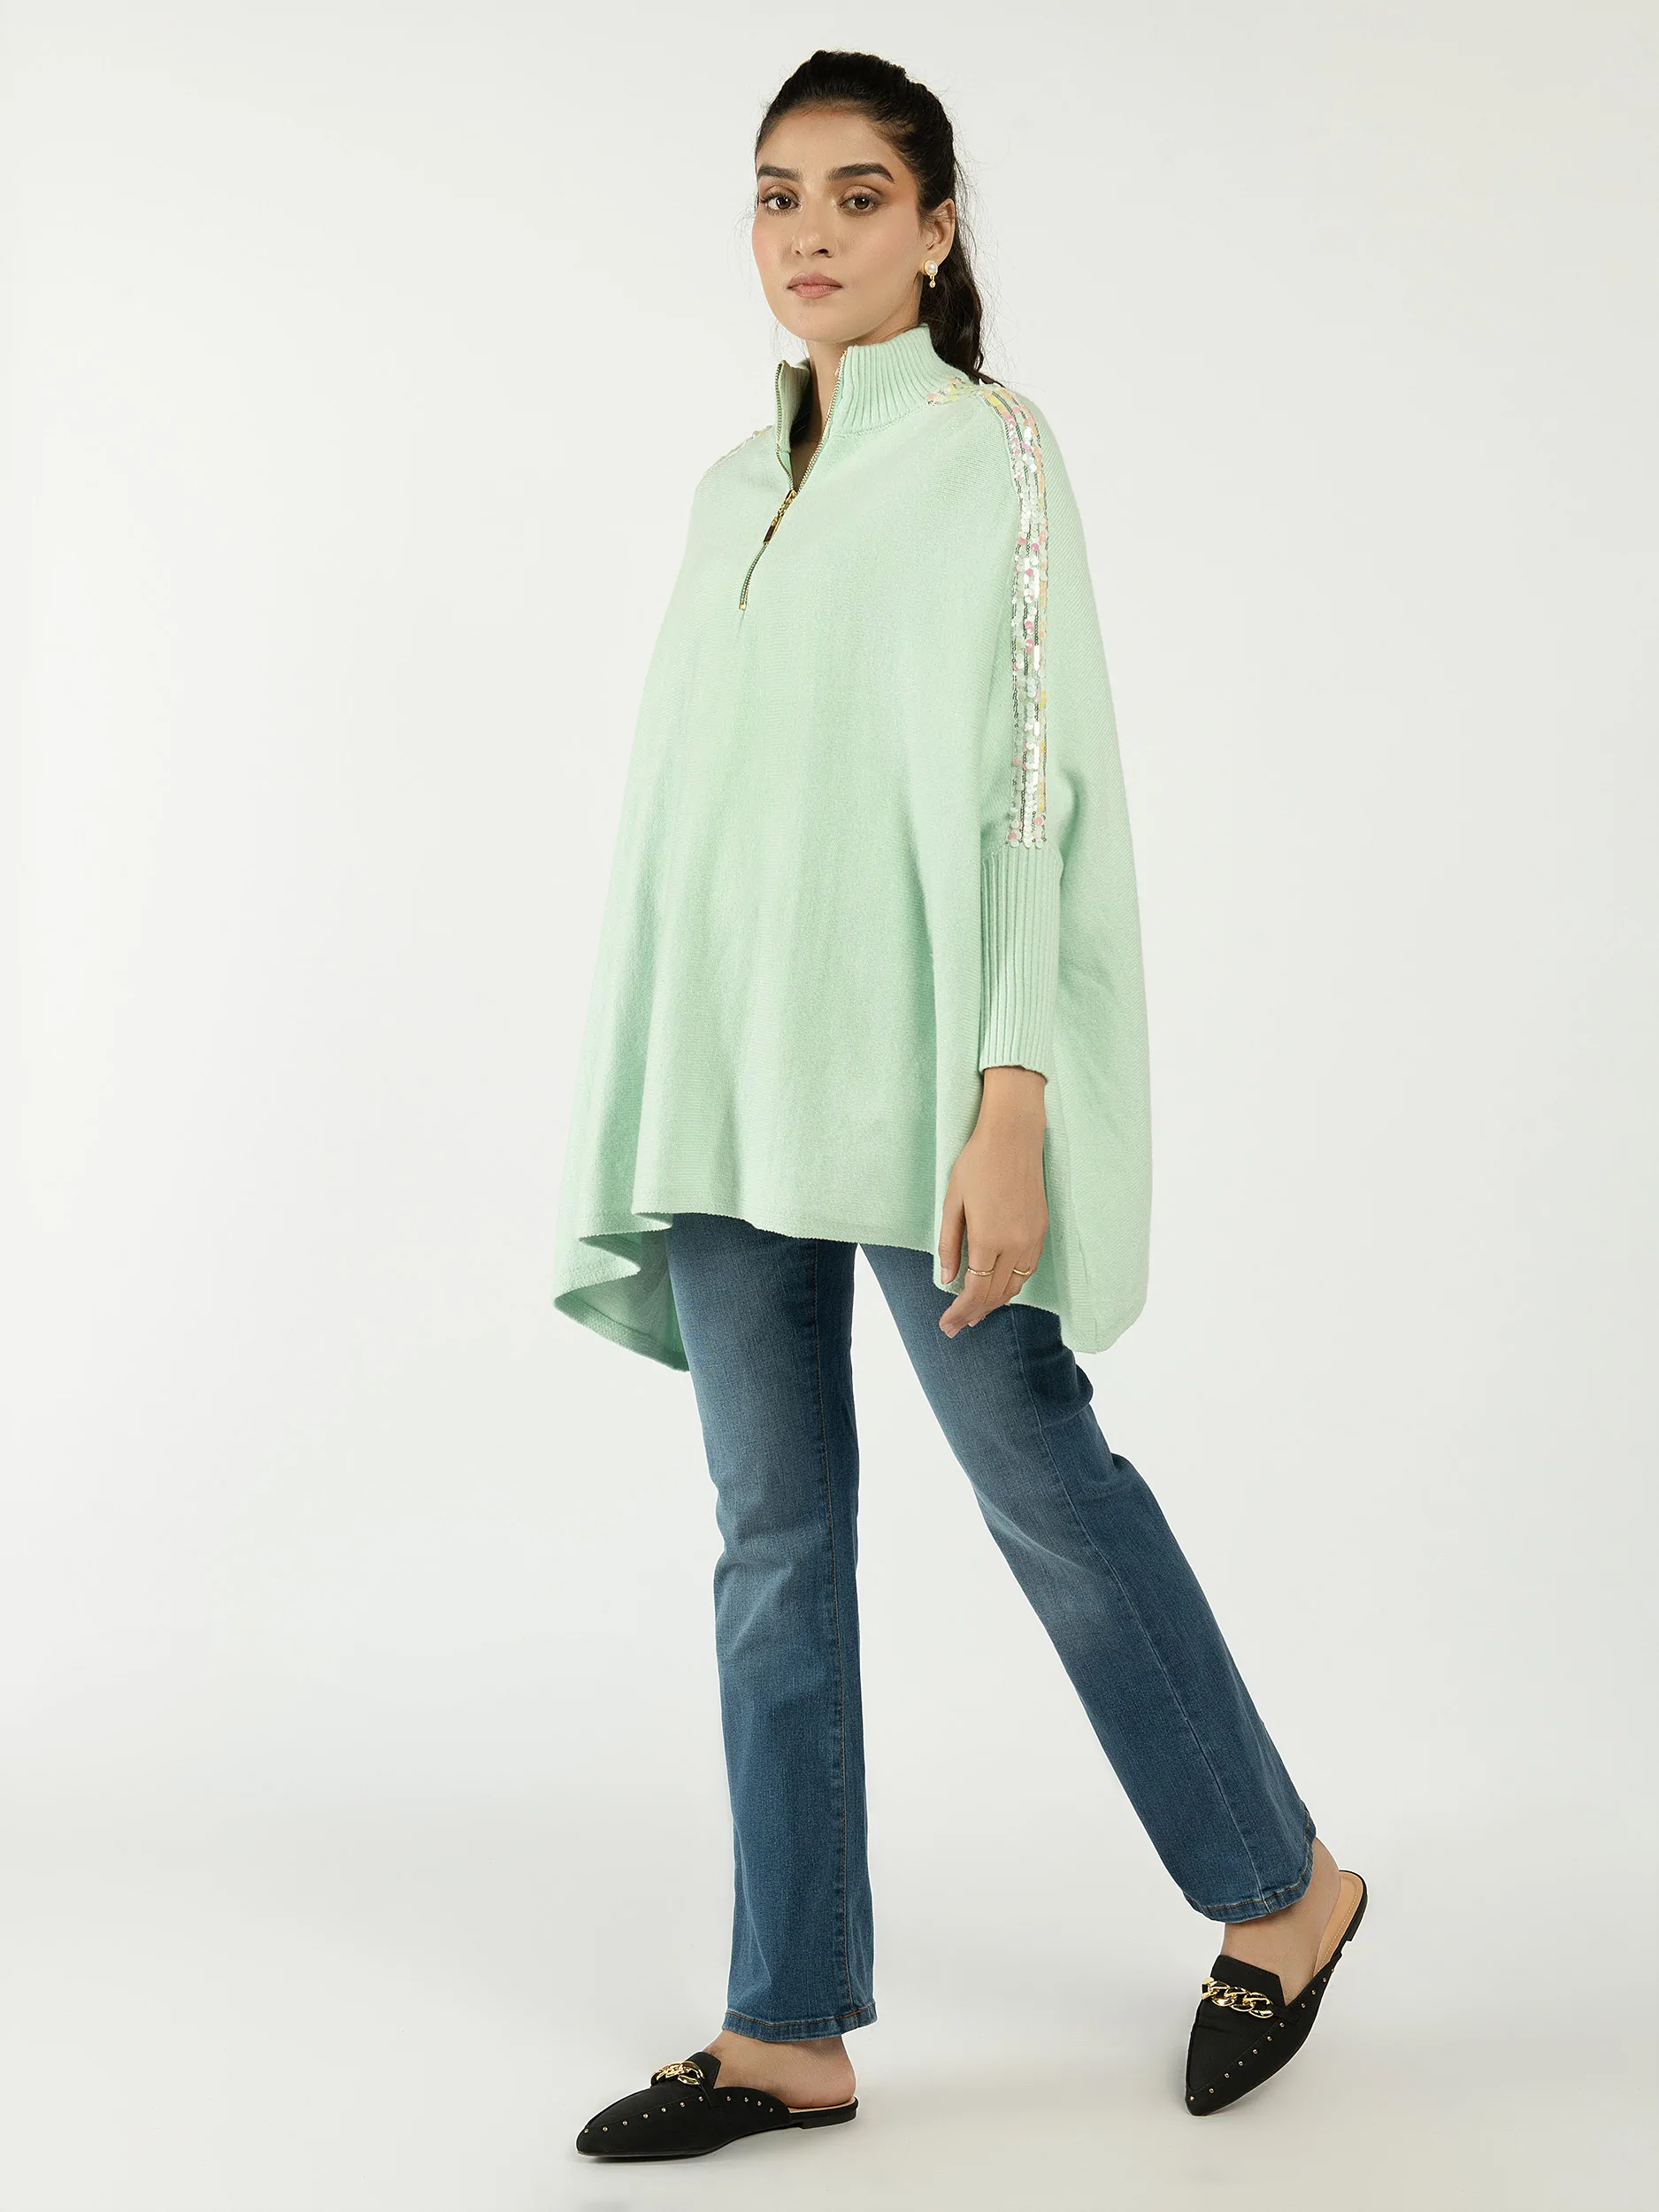 Limelight Batwing Sweater